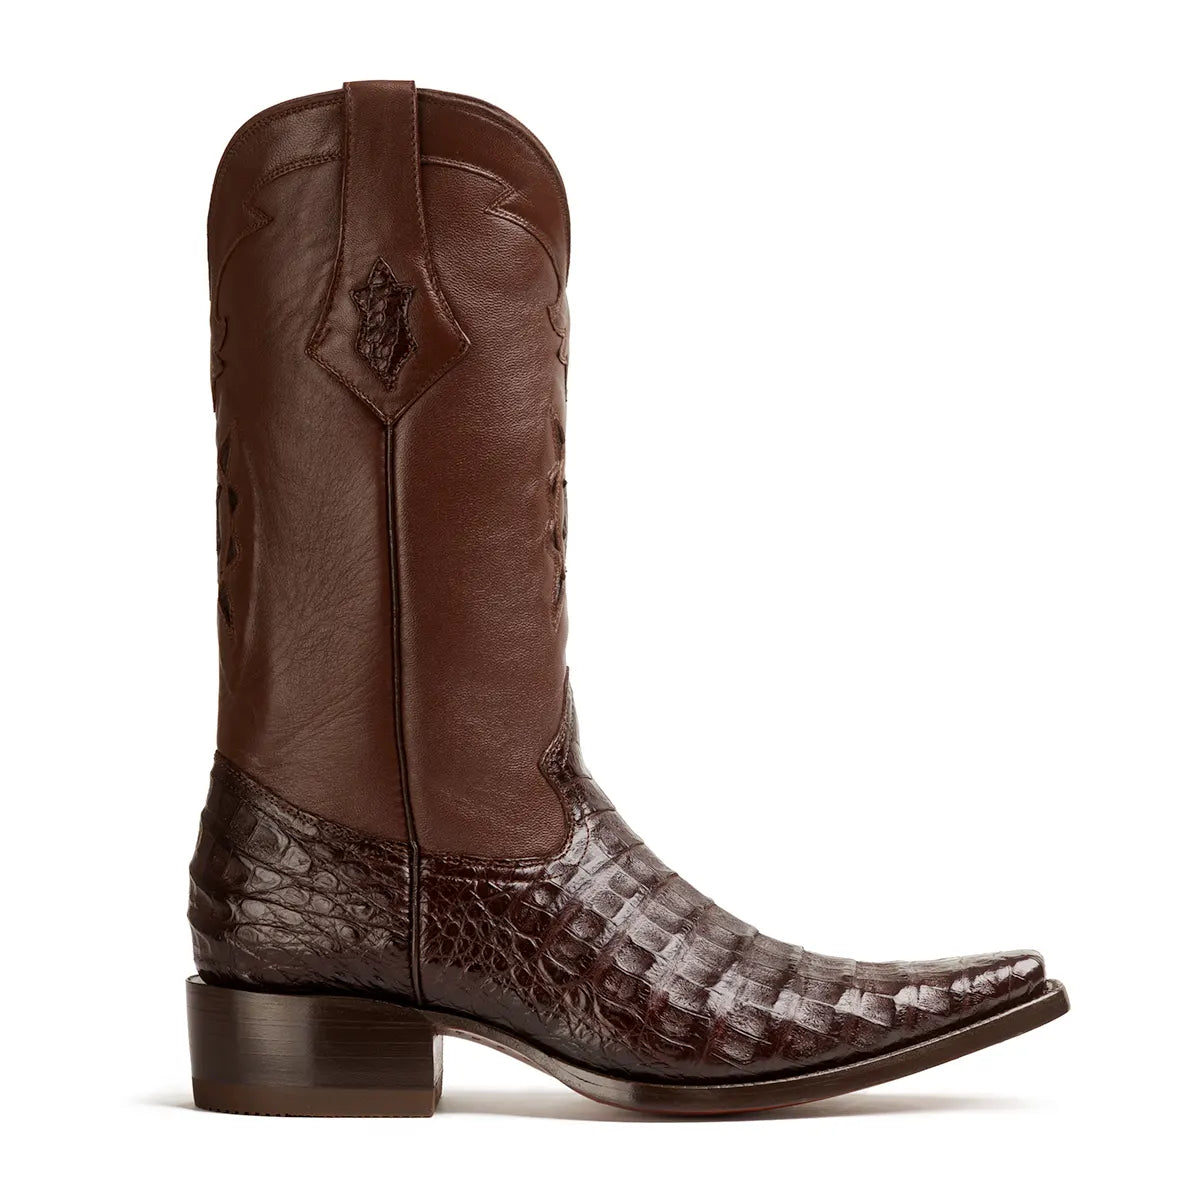 Vicente Caiman Belly Spanish Toe Boot - Brown